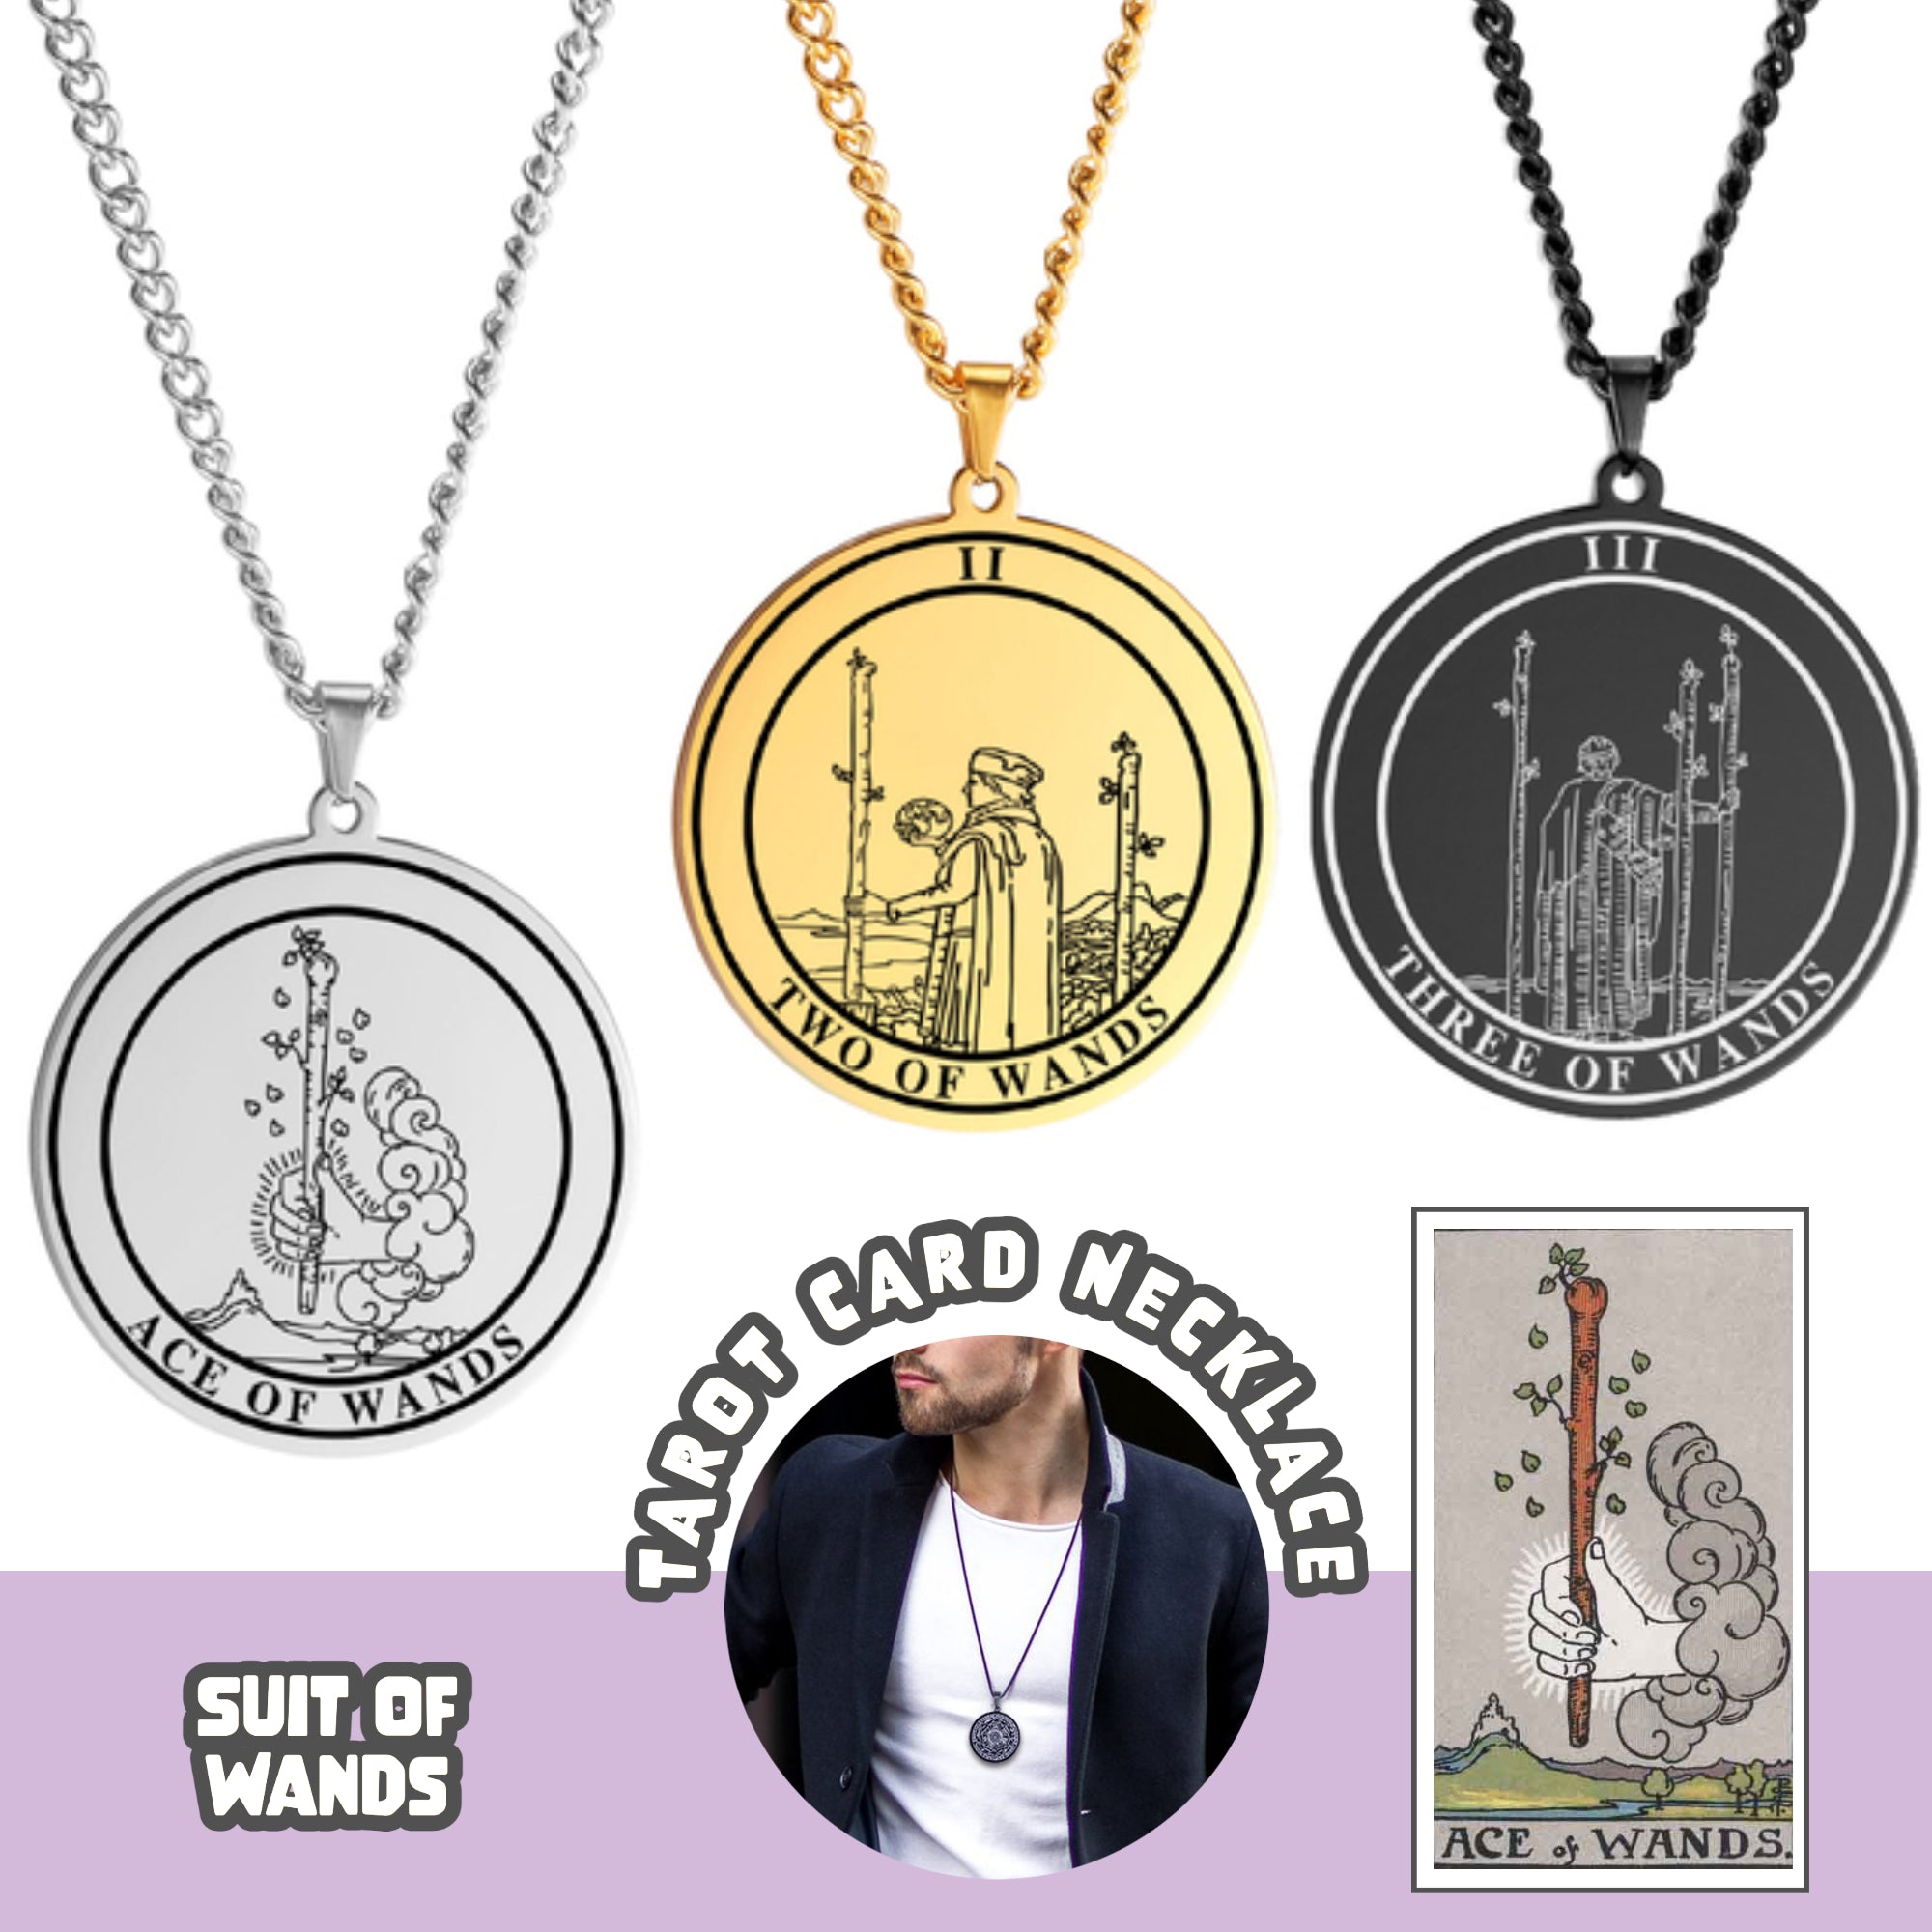 Round Tarot Card Necklace | Suit Of Wands Minor Arcana Rounded Cards Pendant | Unisex Statement Jewelry | Apollo Tarot